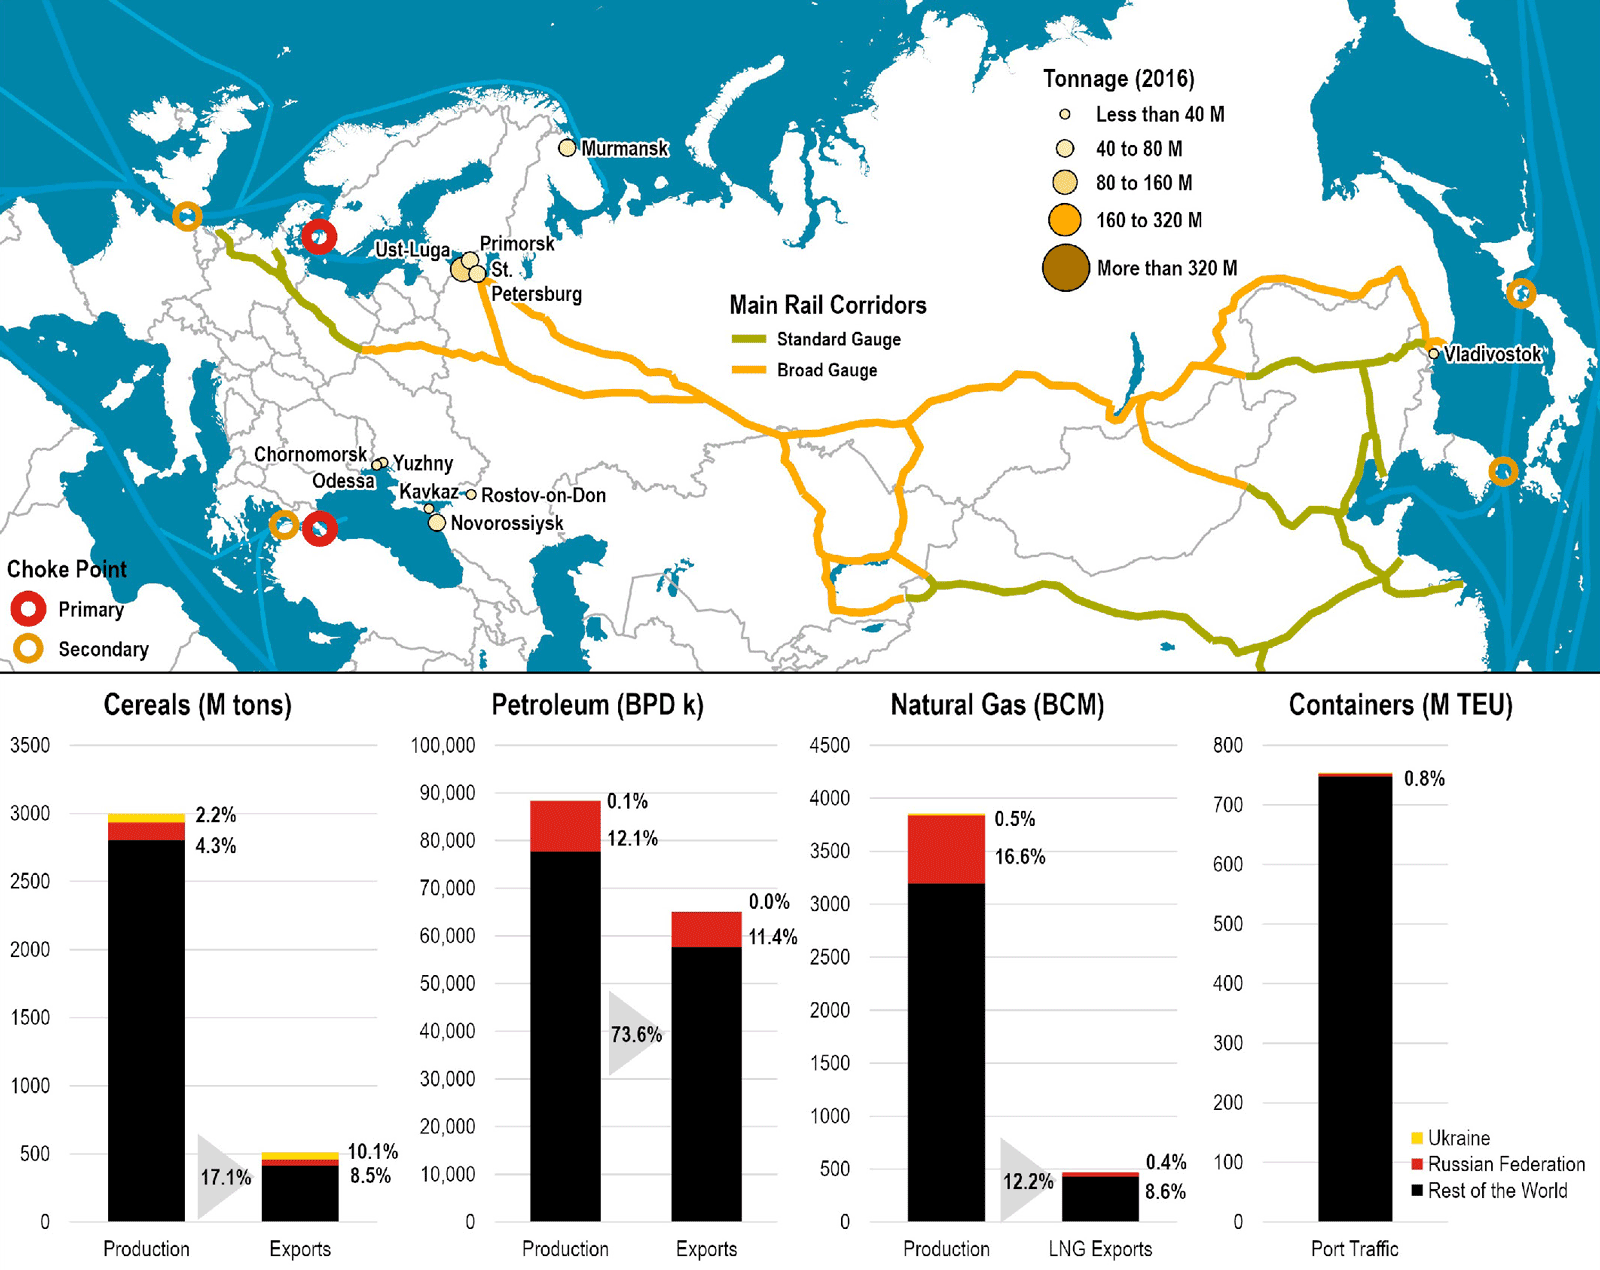 Russian Federation and Ukraine - Transport networks and contribution to global trade